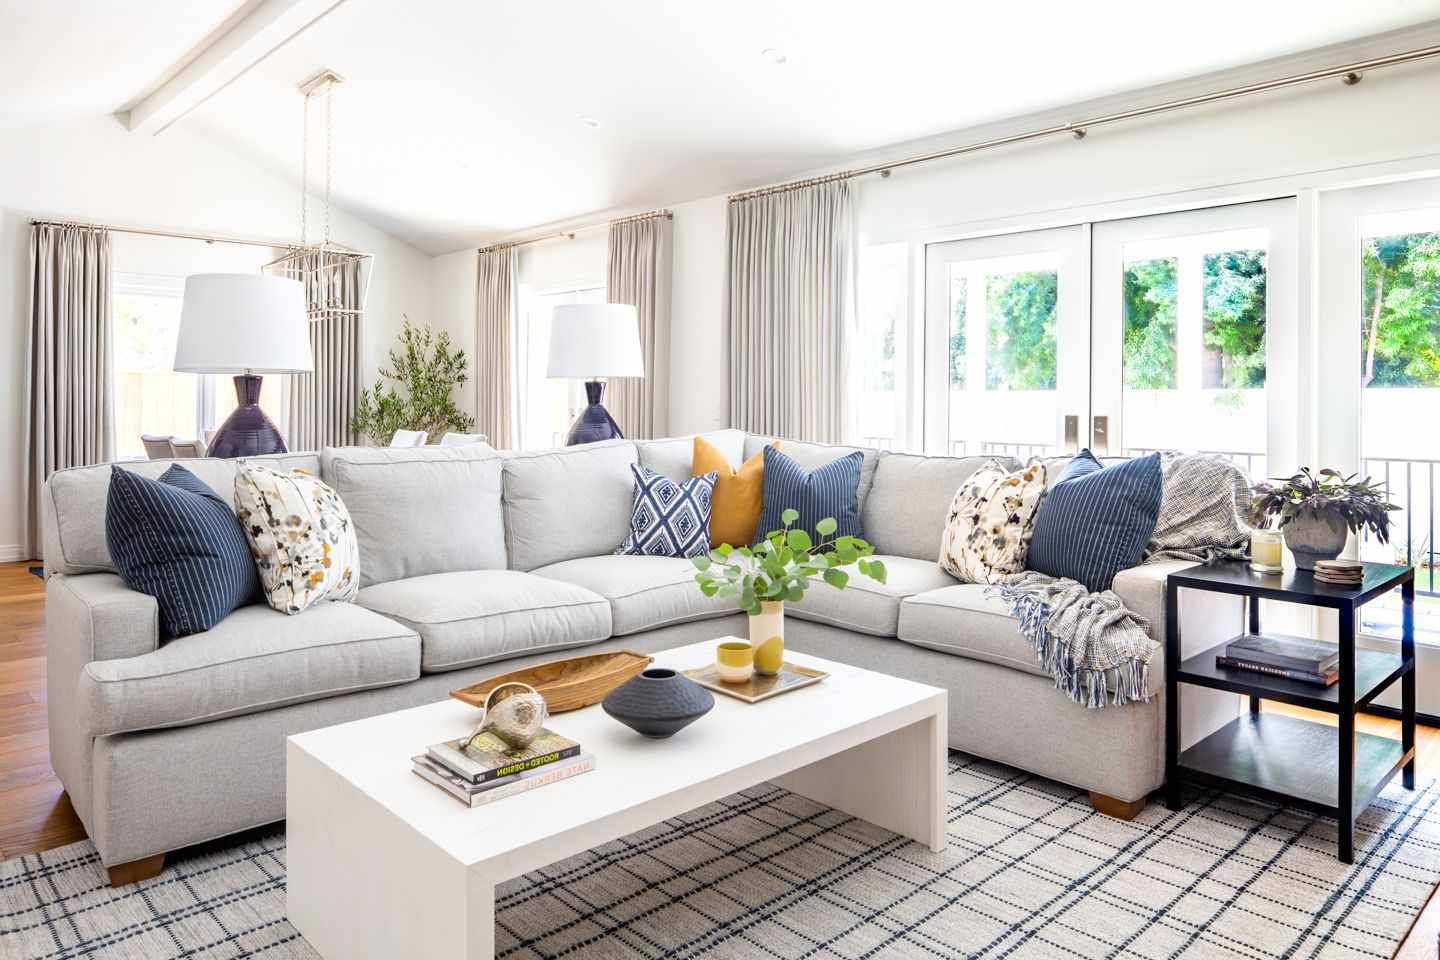 22 Sectional Living Room Ideas That Will Inspire You With Regard To Sectional Couches For Living Room (Gallery 2 of 20)